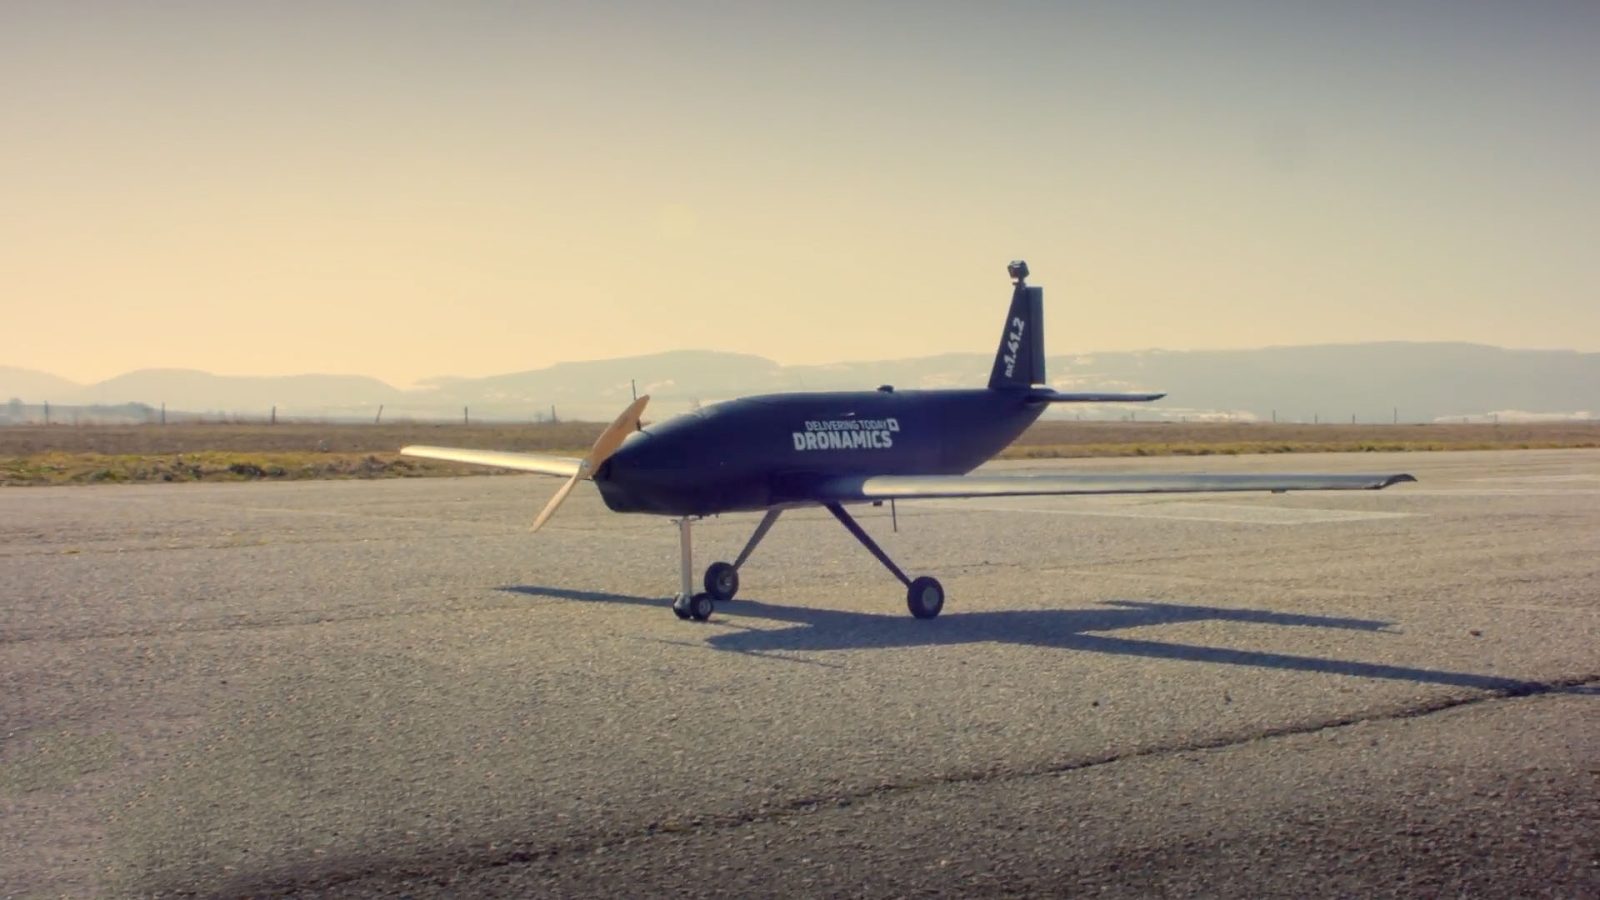 This cargo drone looks to make the "long haul" as it carries 800 pounds over 1,550 miles